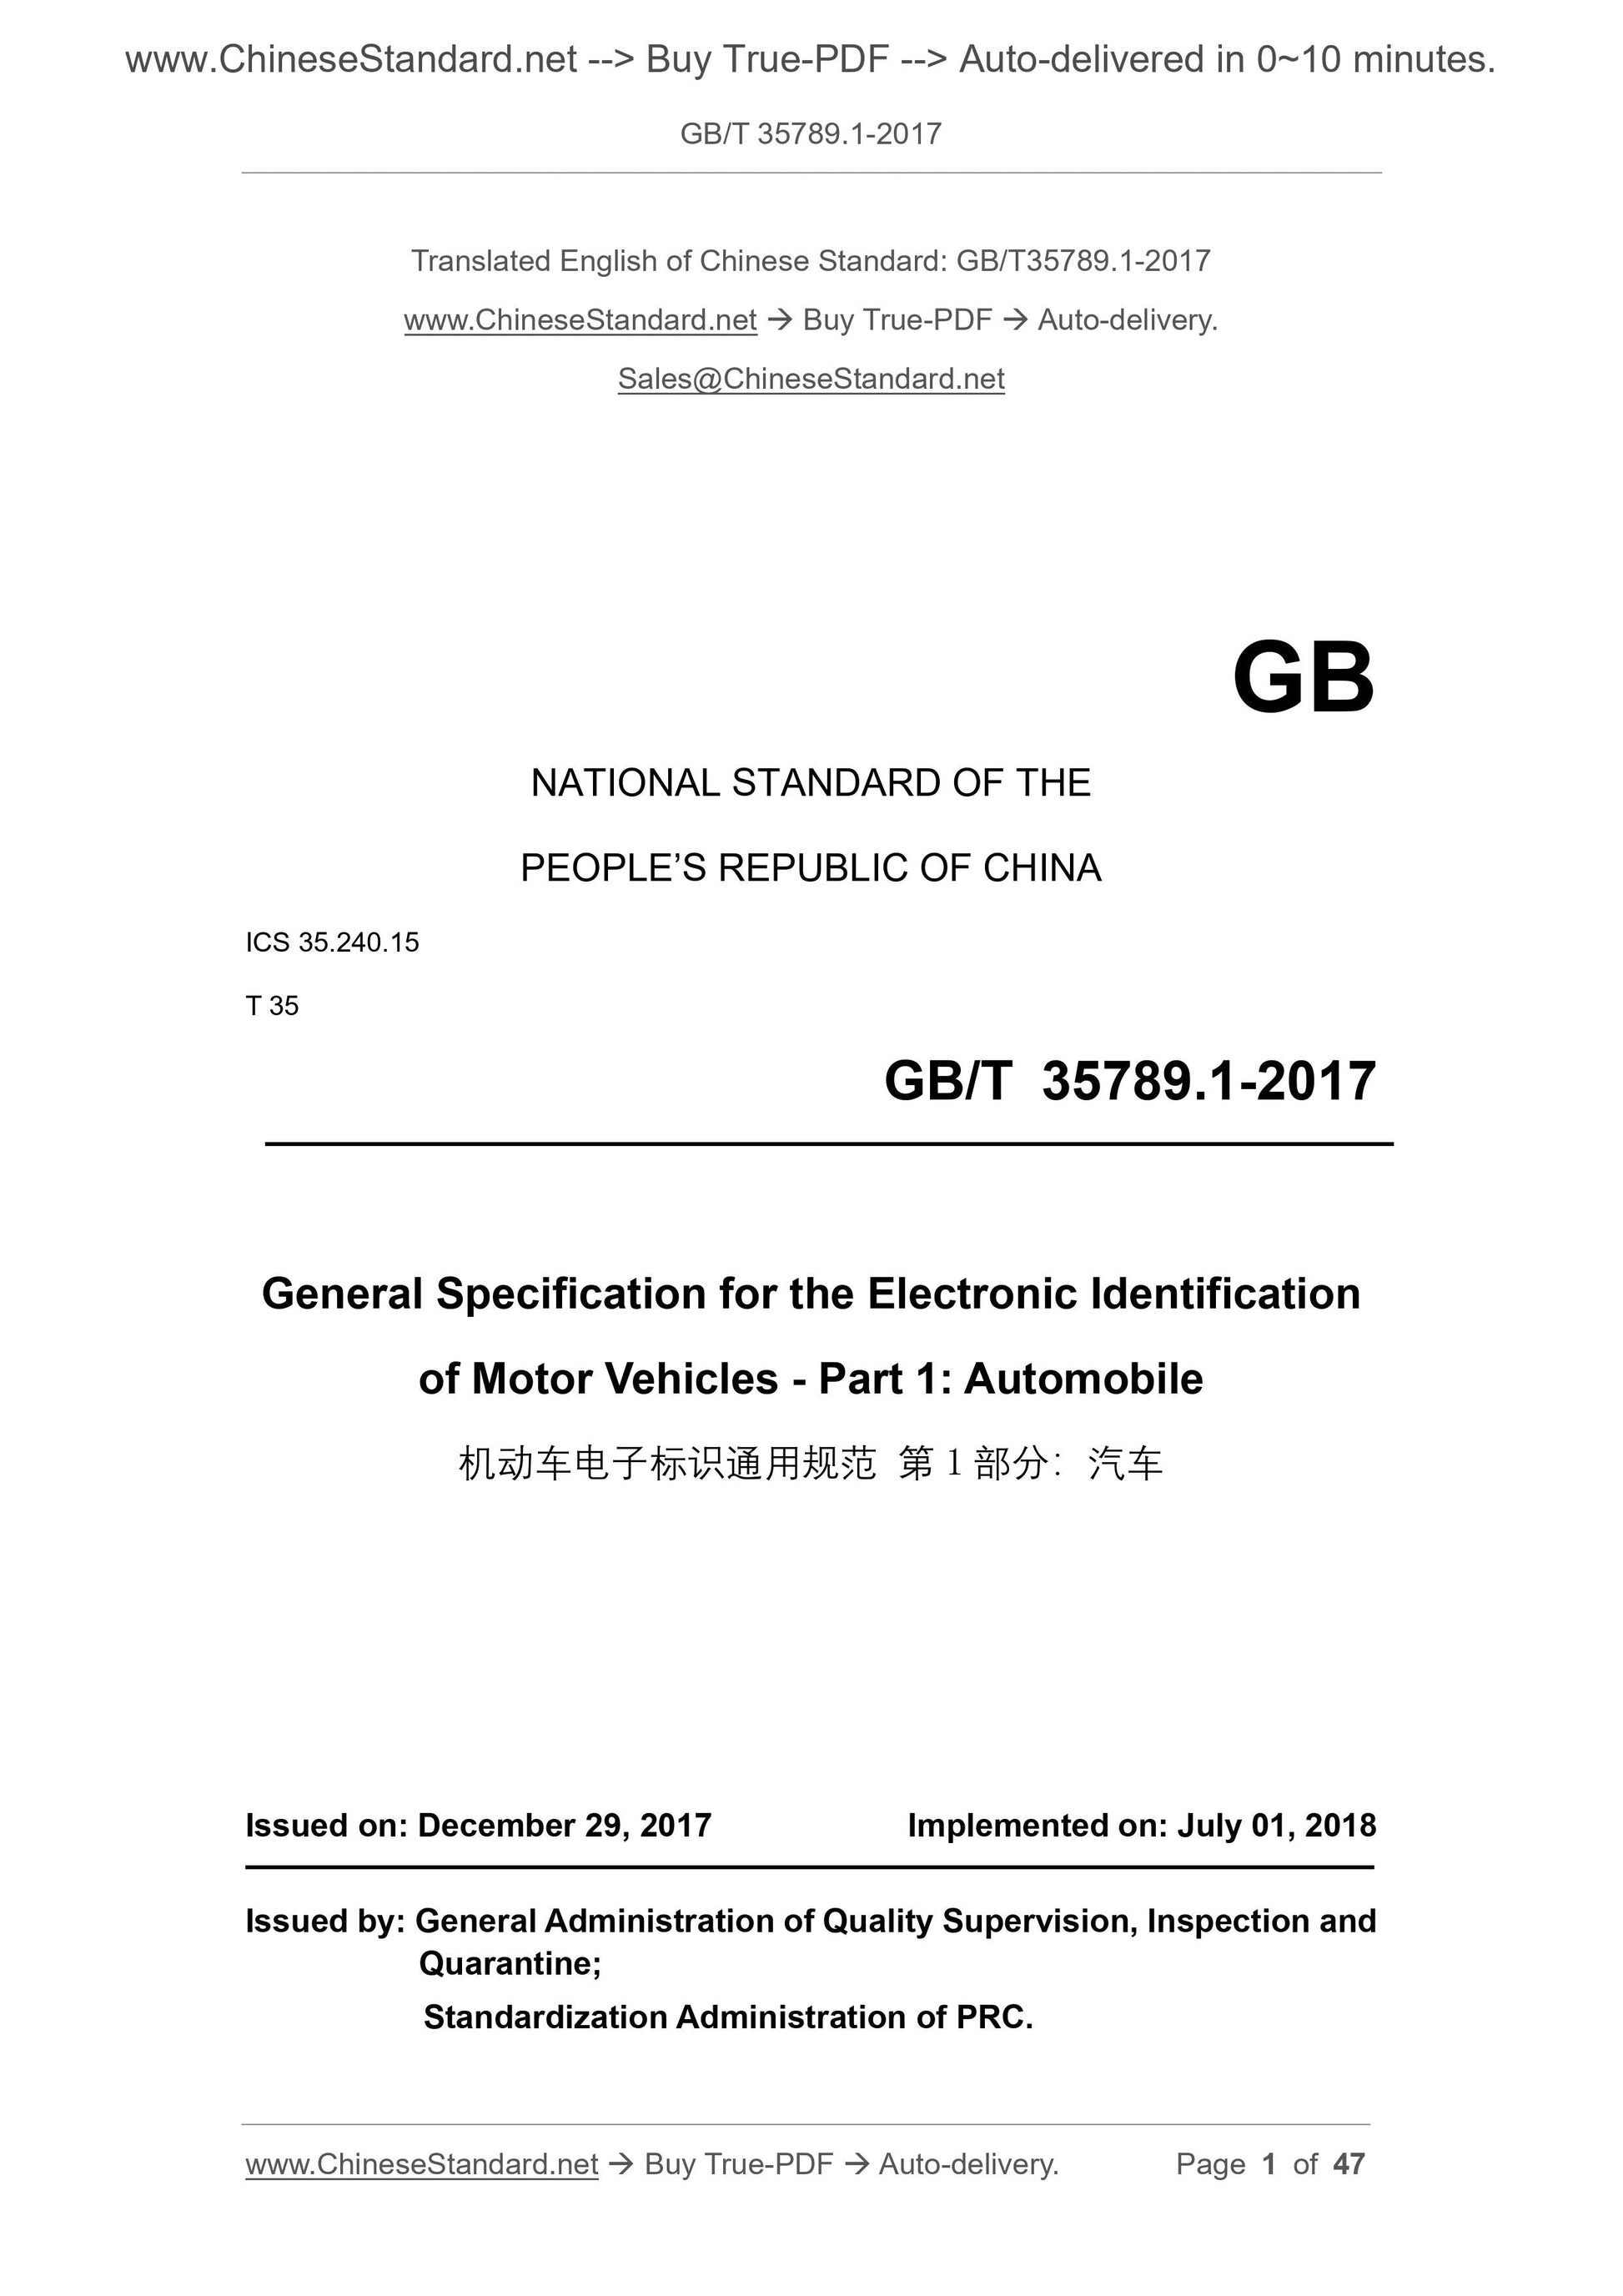 GB/T 35789.1-2017 Page 1